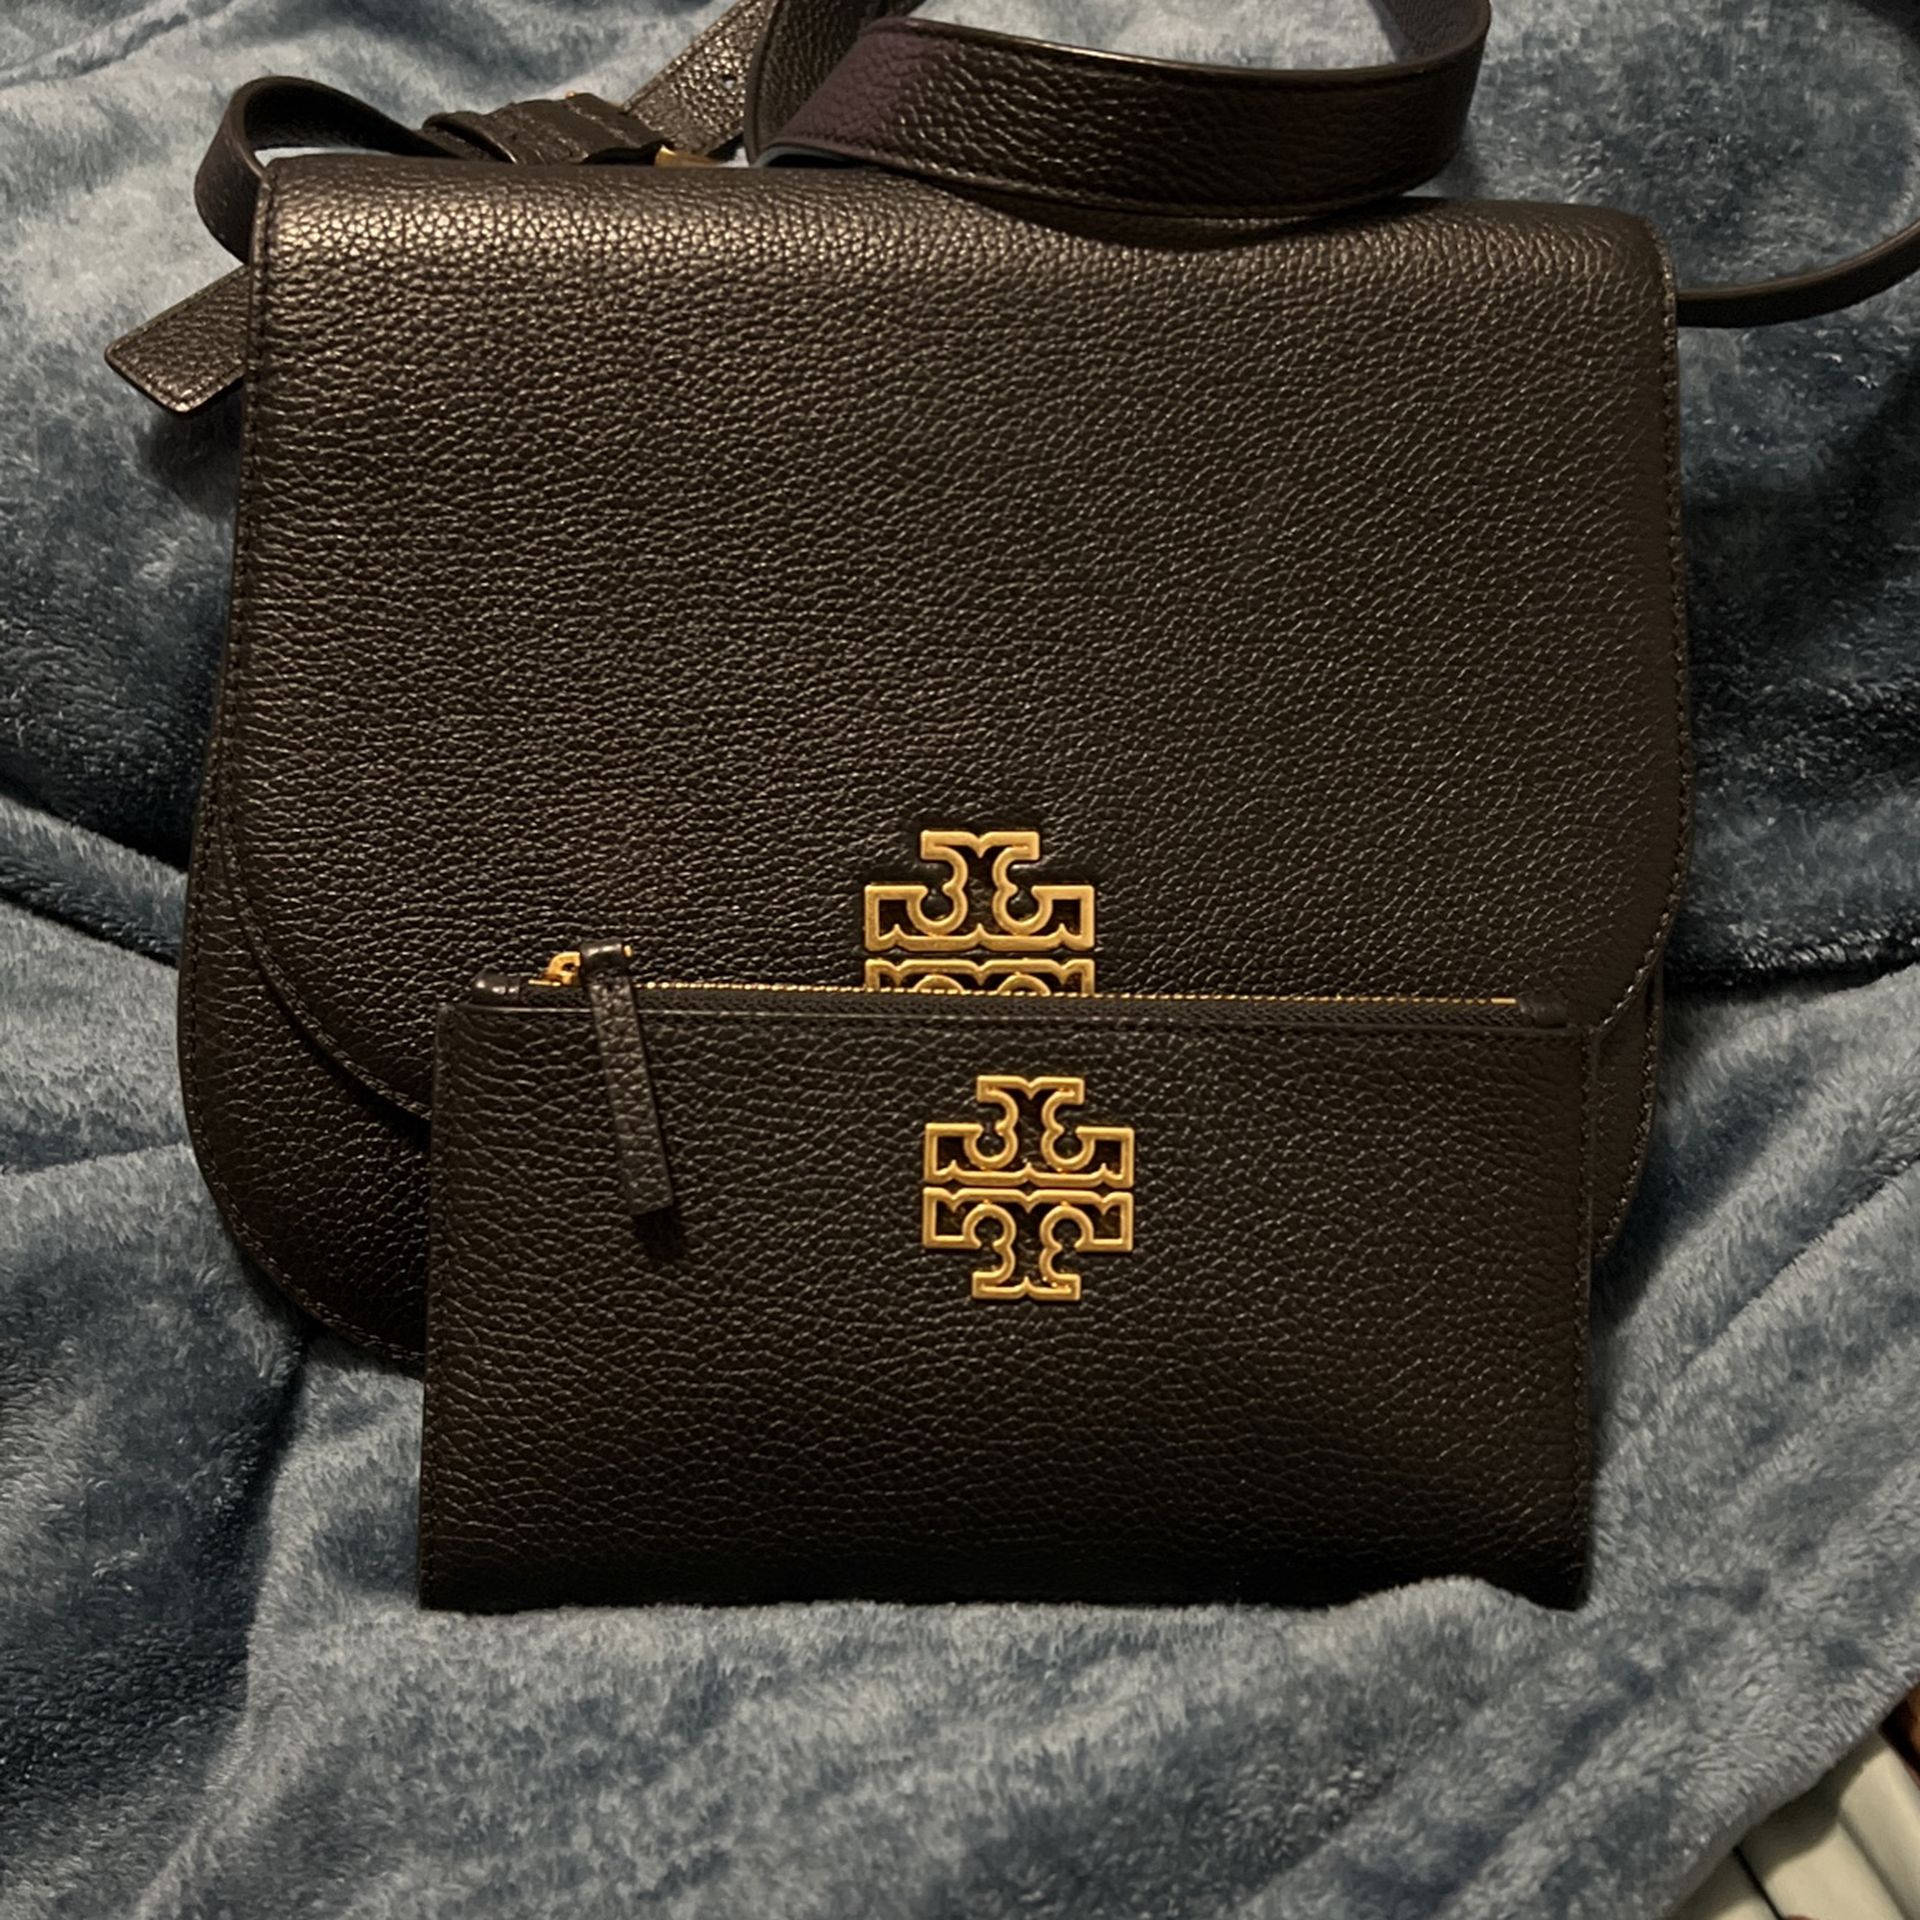 Tory Burch Bag And Clutch Background